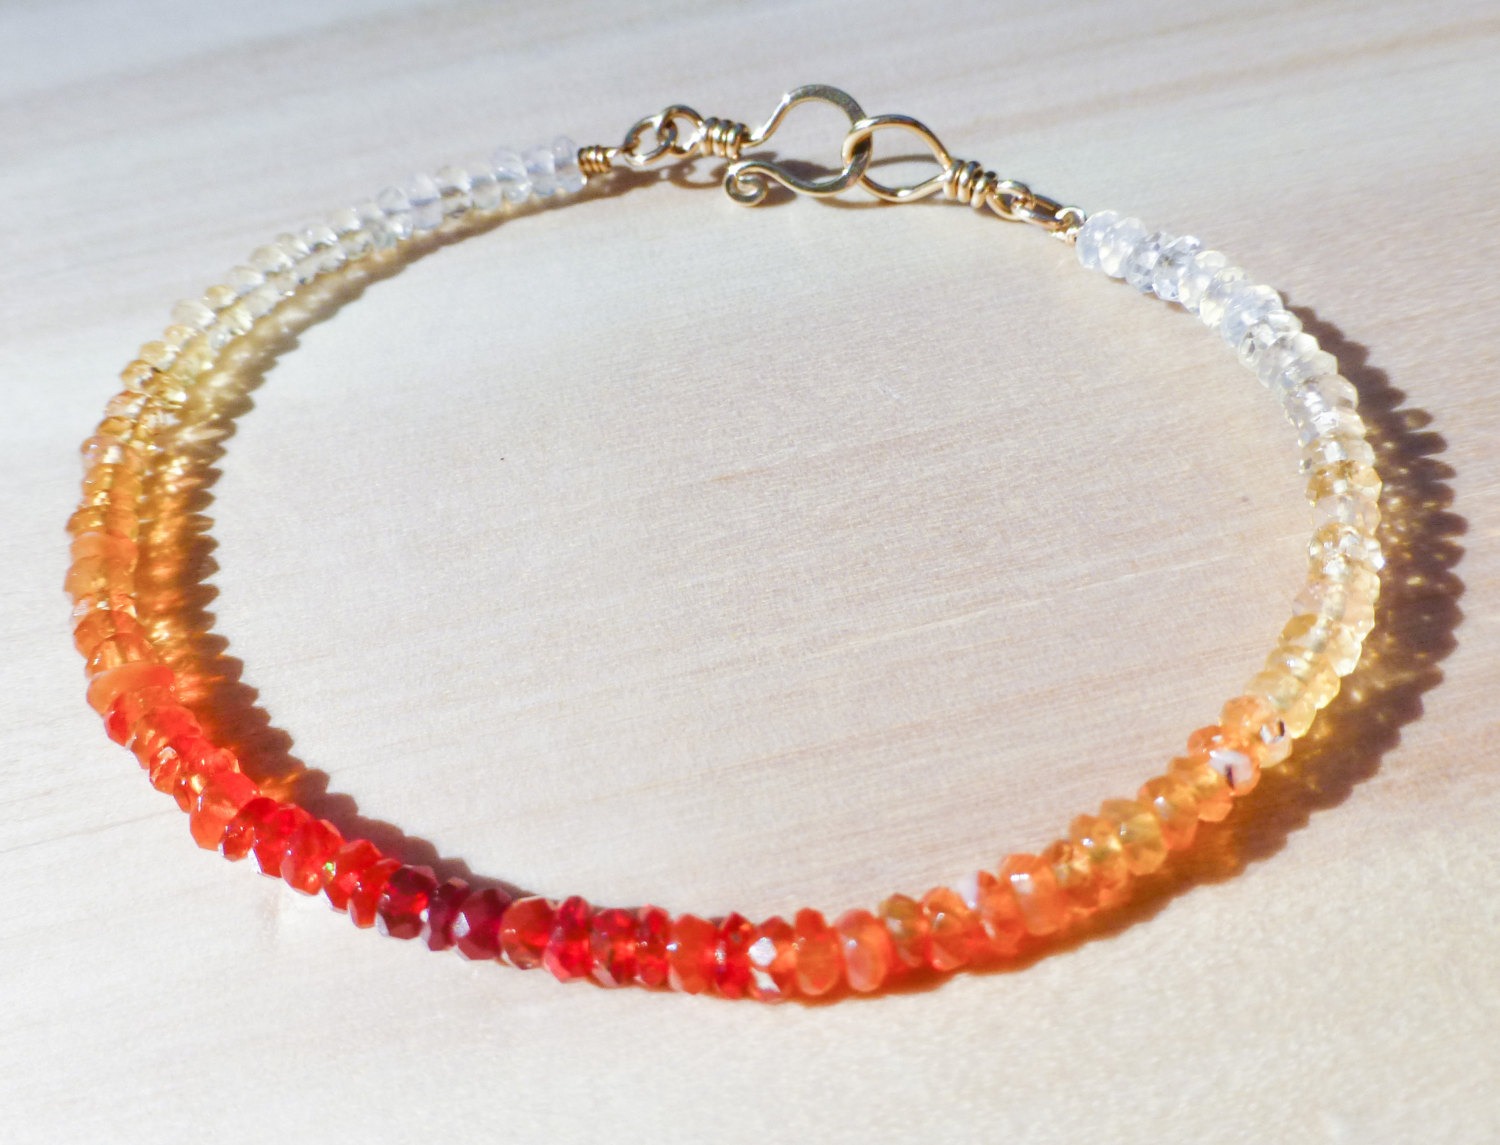 Mexican Fire Opal Stacking Bracelet in Gold Filled